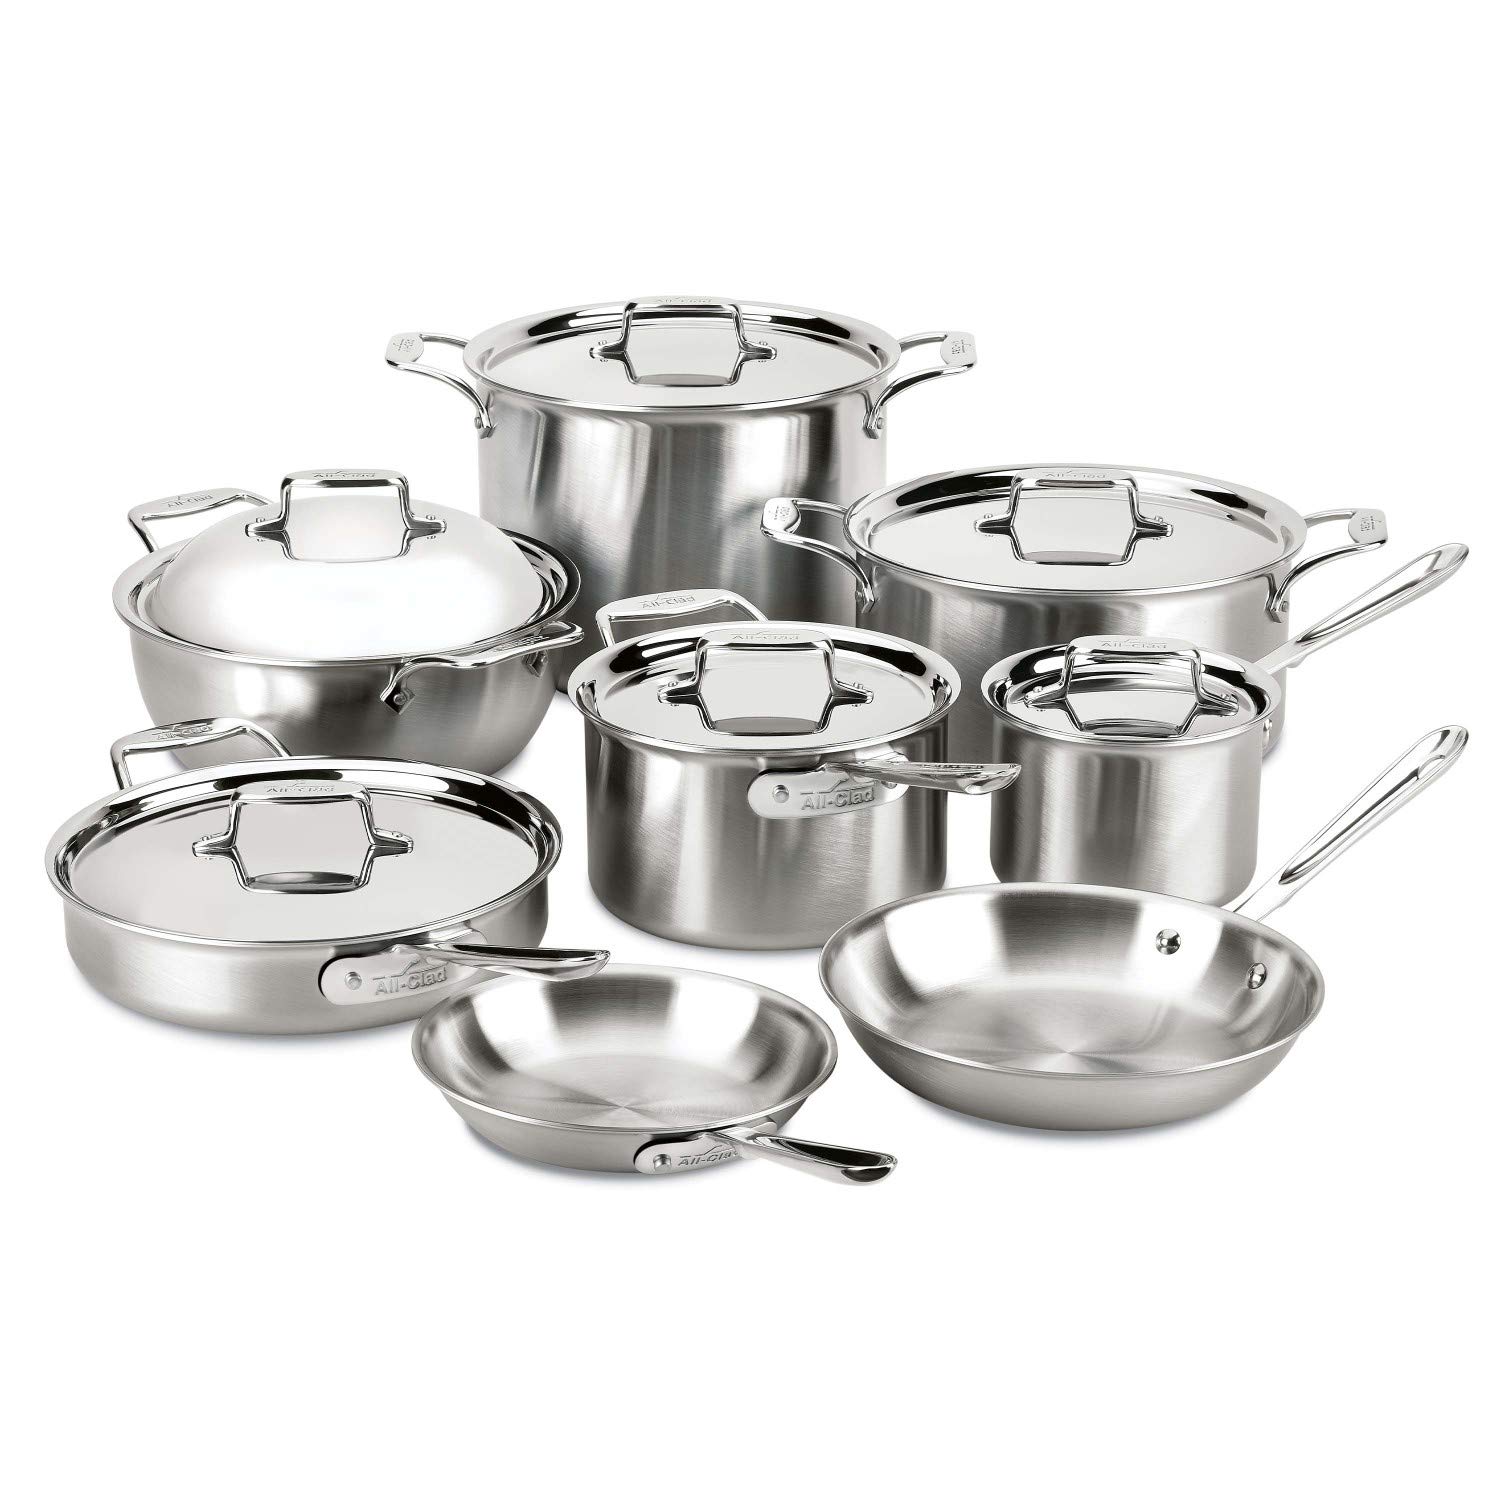 All-Clad D5 5-Ply Brushed Stainless Steel Cookware Set 14 Piece Induction Oven Broil Safe 600F Pots and Pans